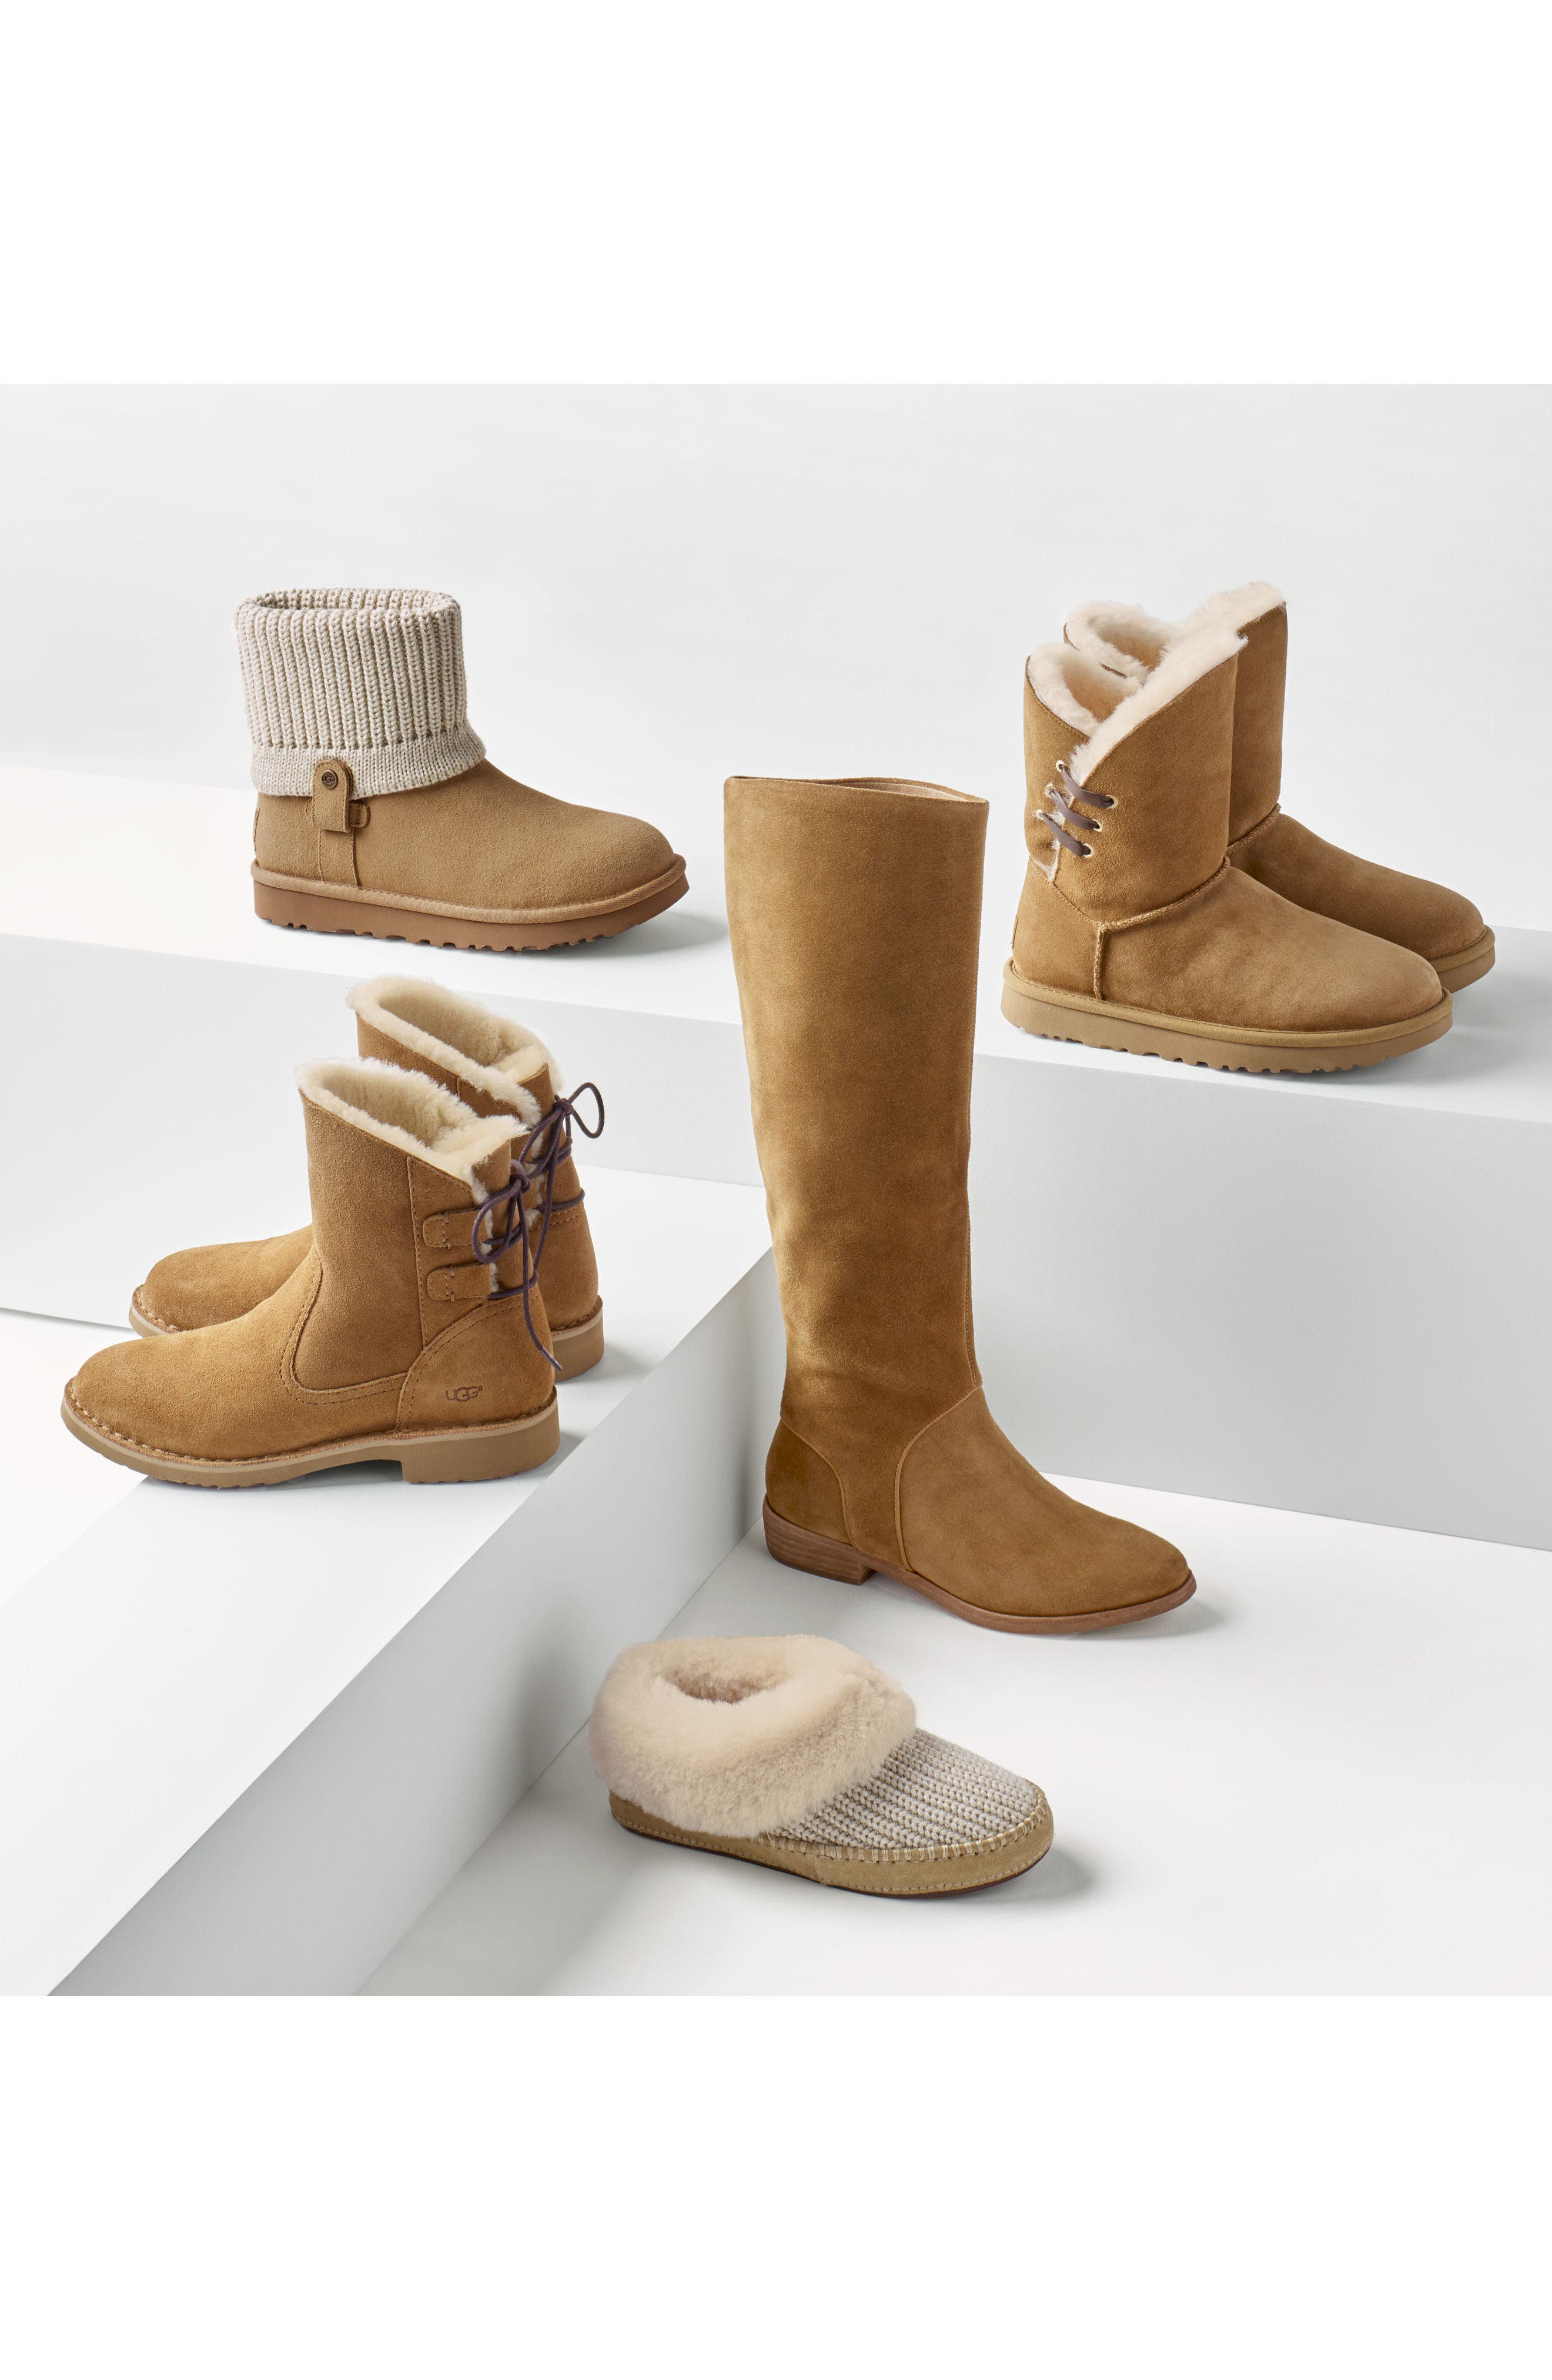 daley tall boot ugg